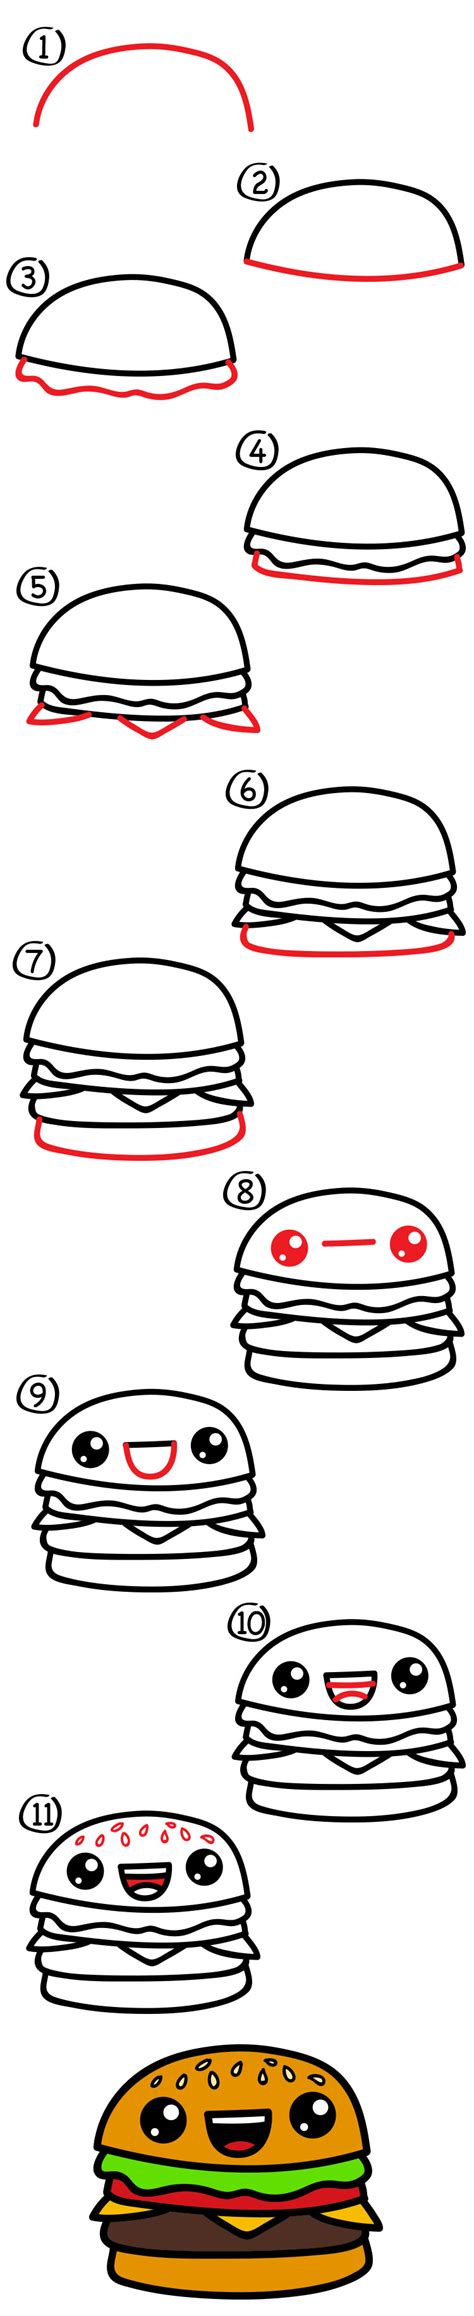 How To Draw A Funny Cheeseburger Art For Kids Hub Art For Kids